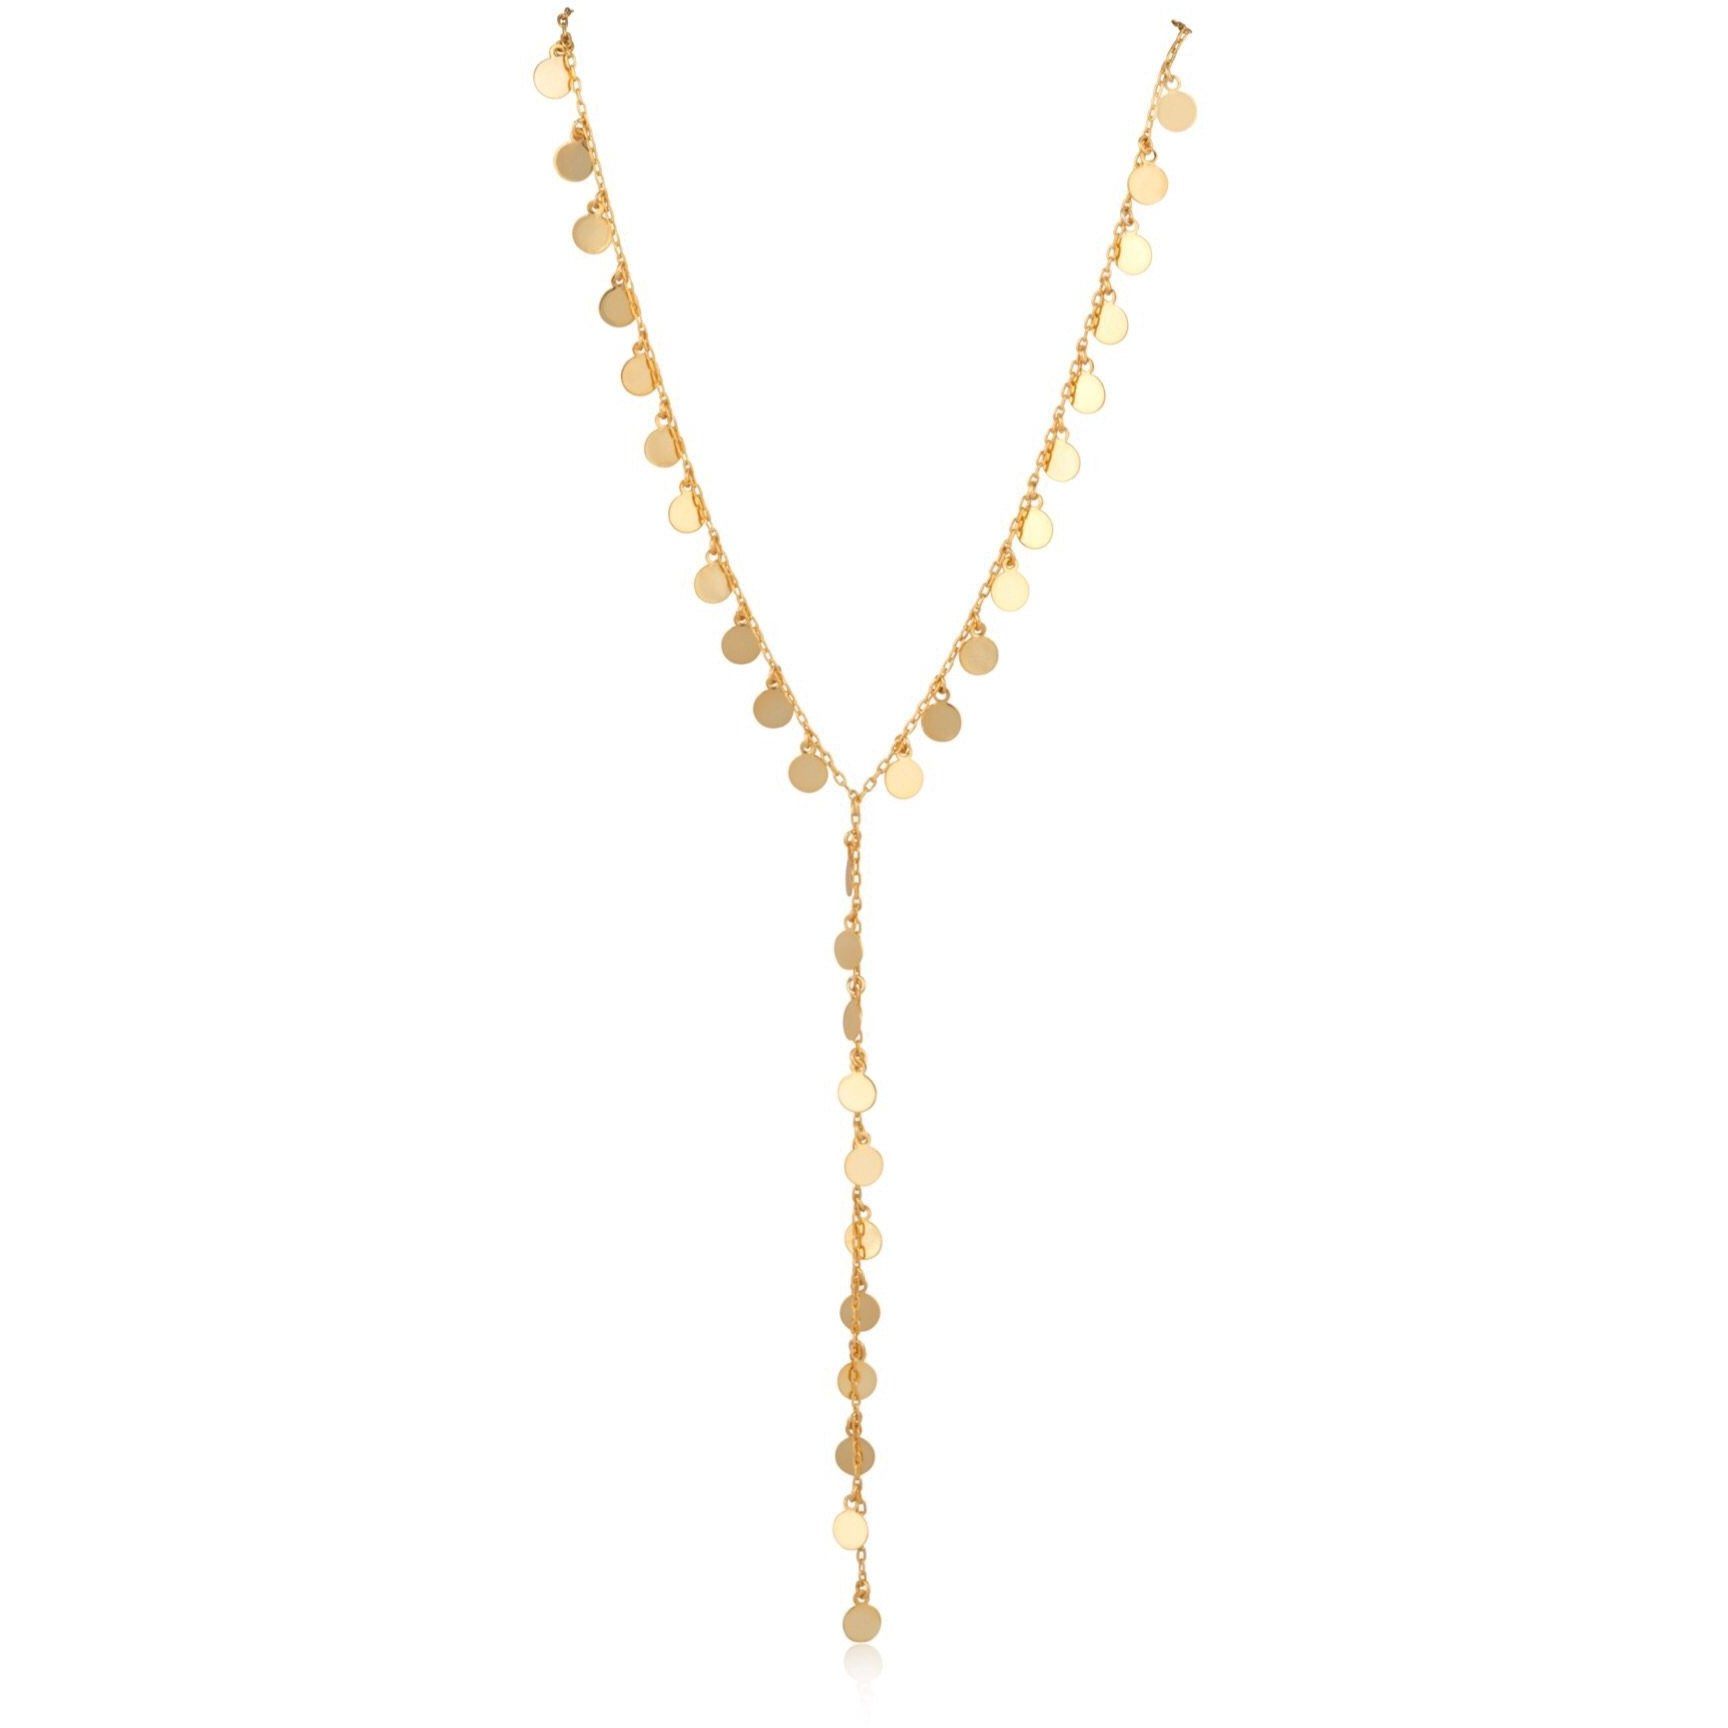 Gold-filled Cha Cha Lariat Necklace - 18" with 4" Extender - Jewelry & Watches - Bijou Her -  -  - 